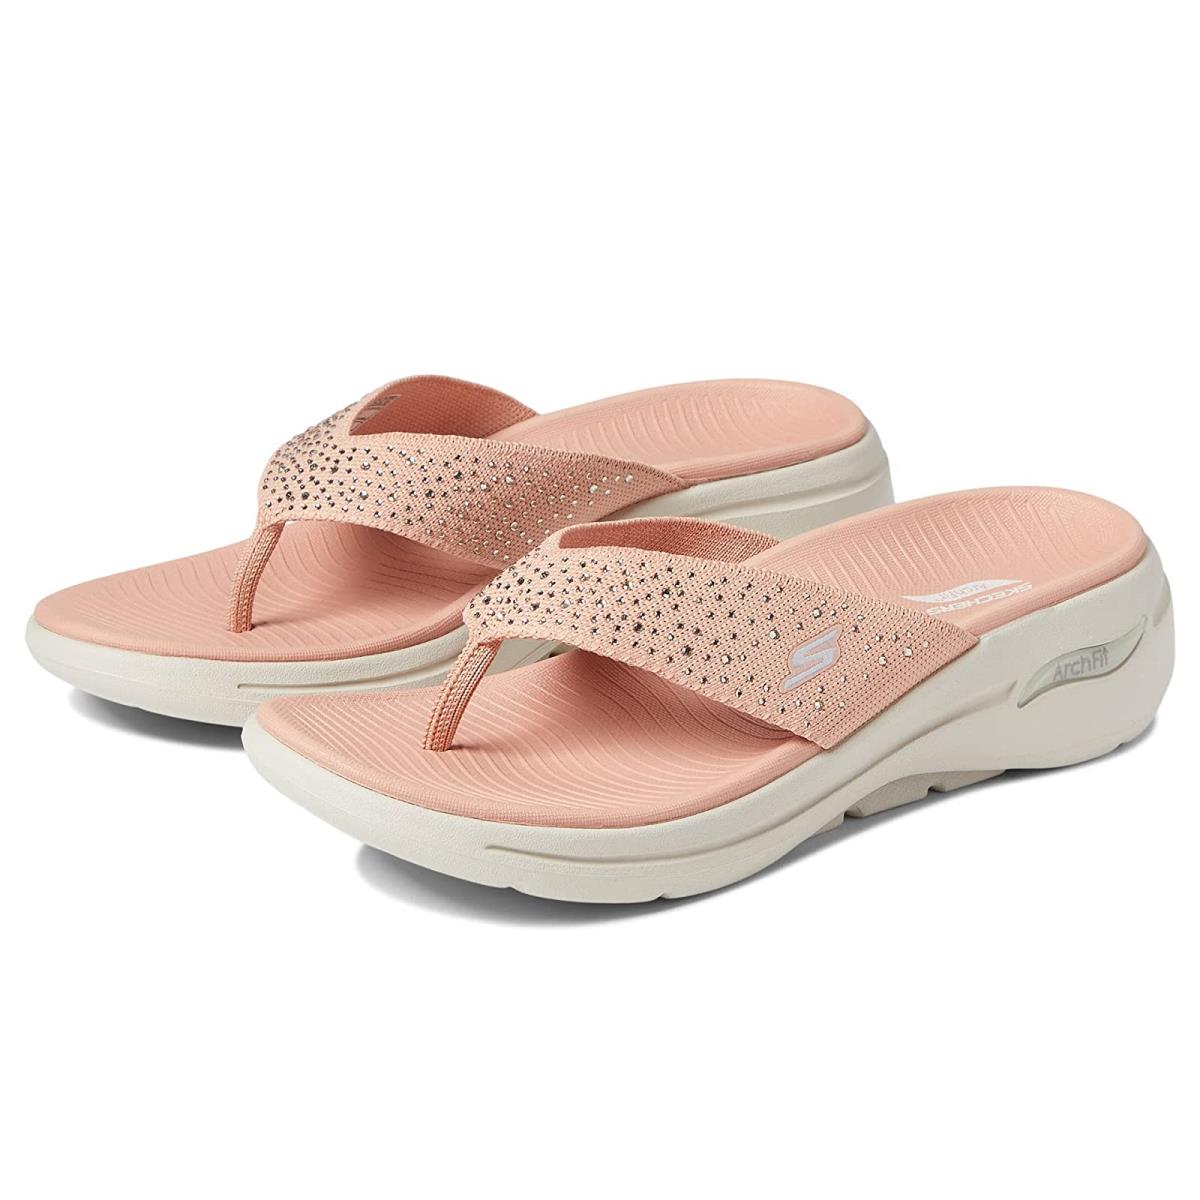 Woman`s Shoes Skechers Performance Go Walk Arch Fit Knit Sandal with Rhinestones Rose